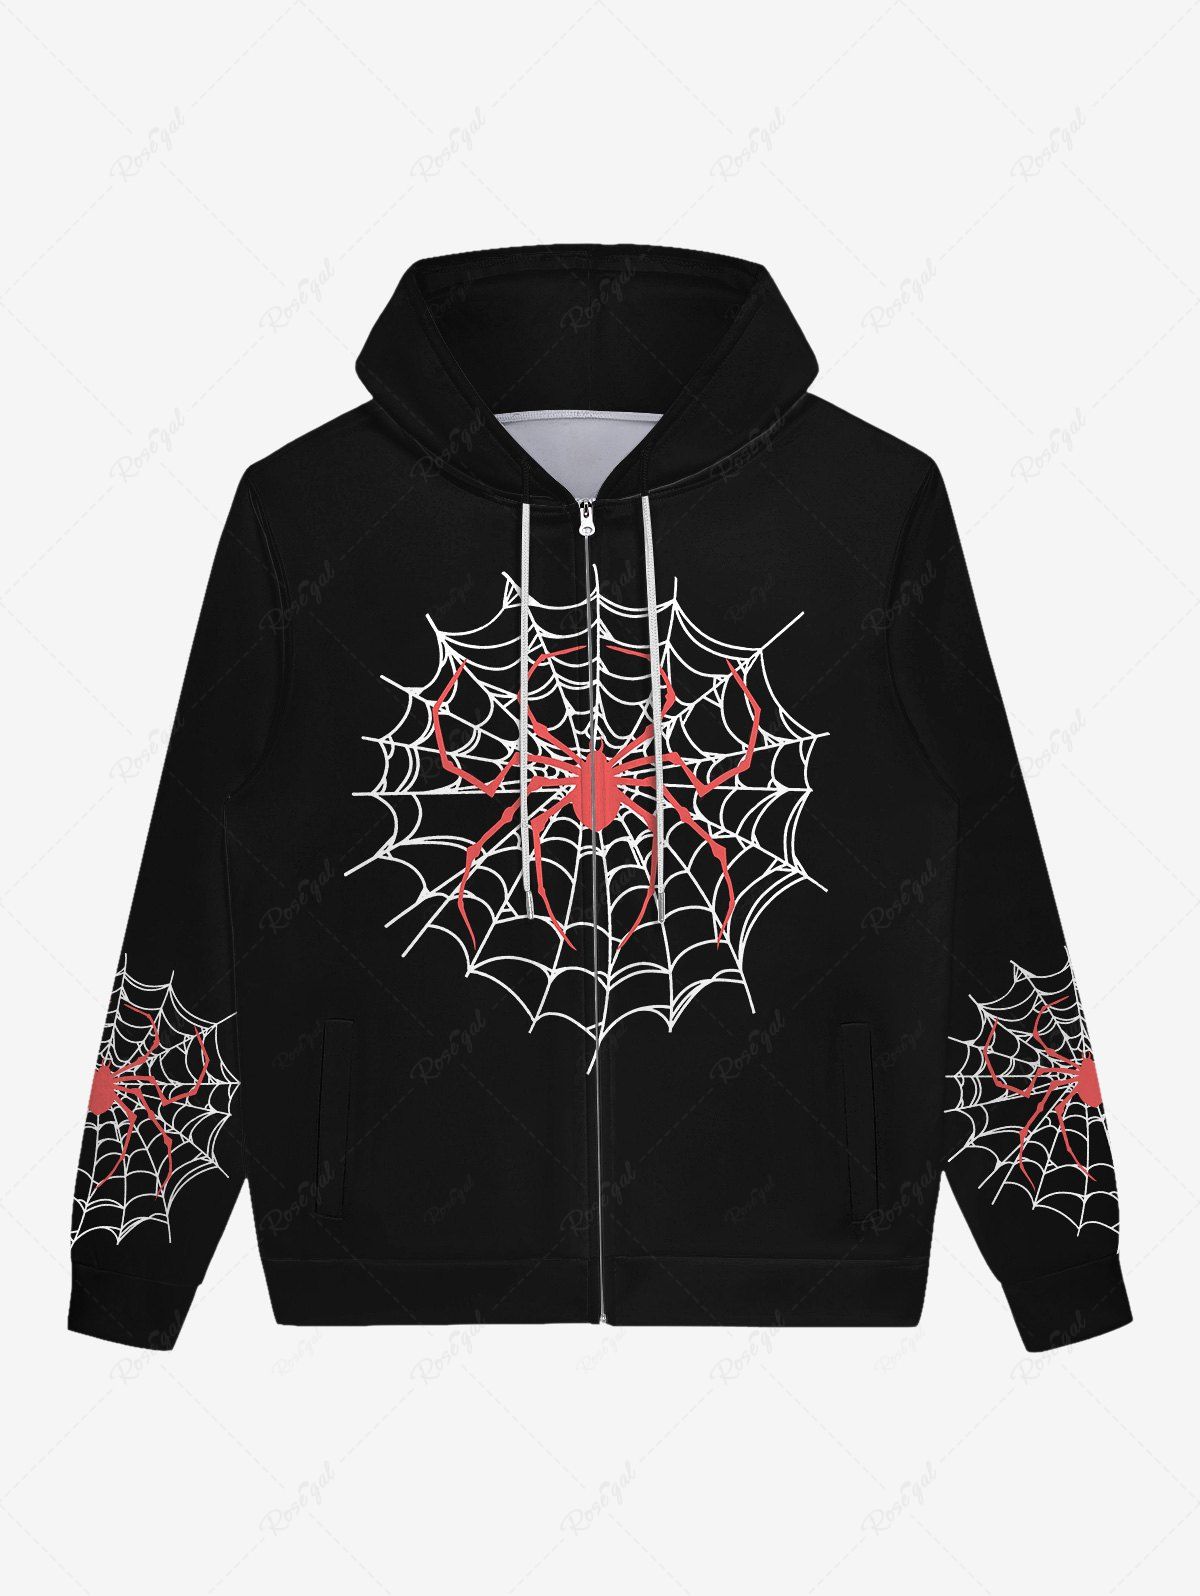 Trendy Gothic Spider and Spider-Web Print Halloween Zipper Drawstring Hoodie For Men  